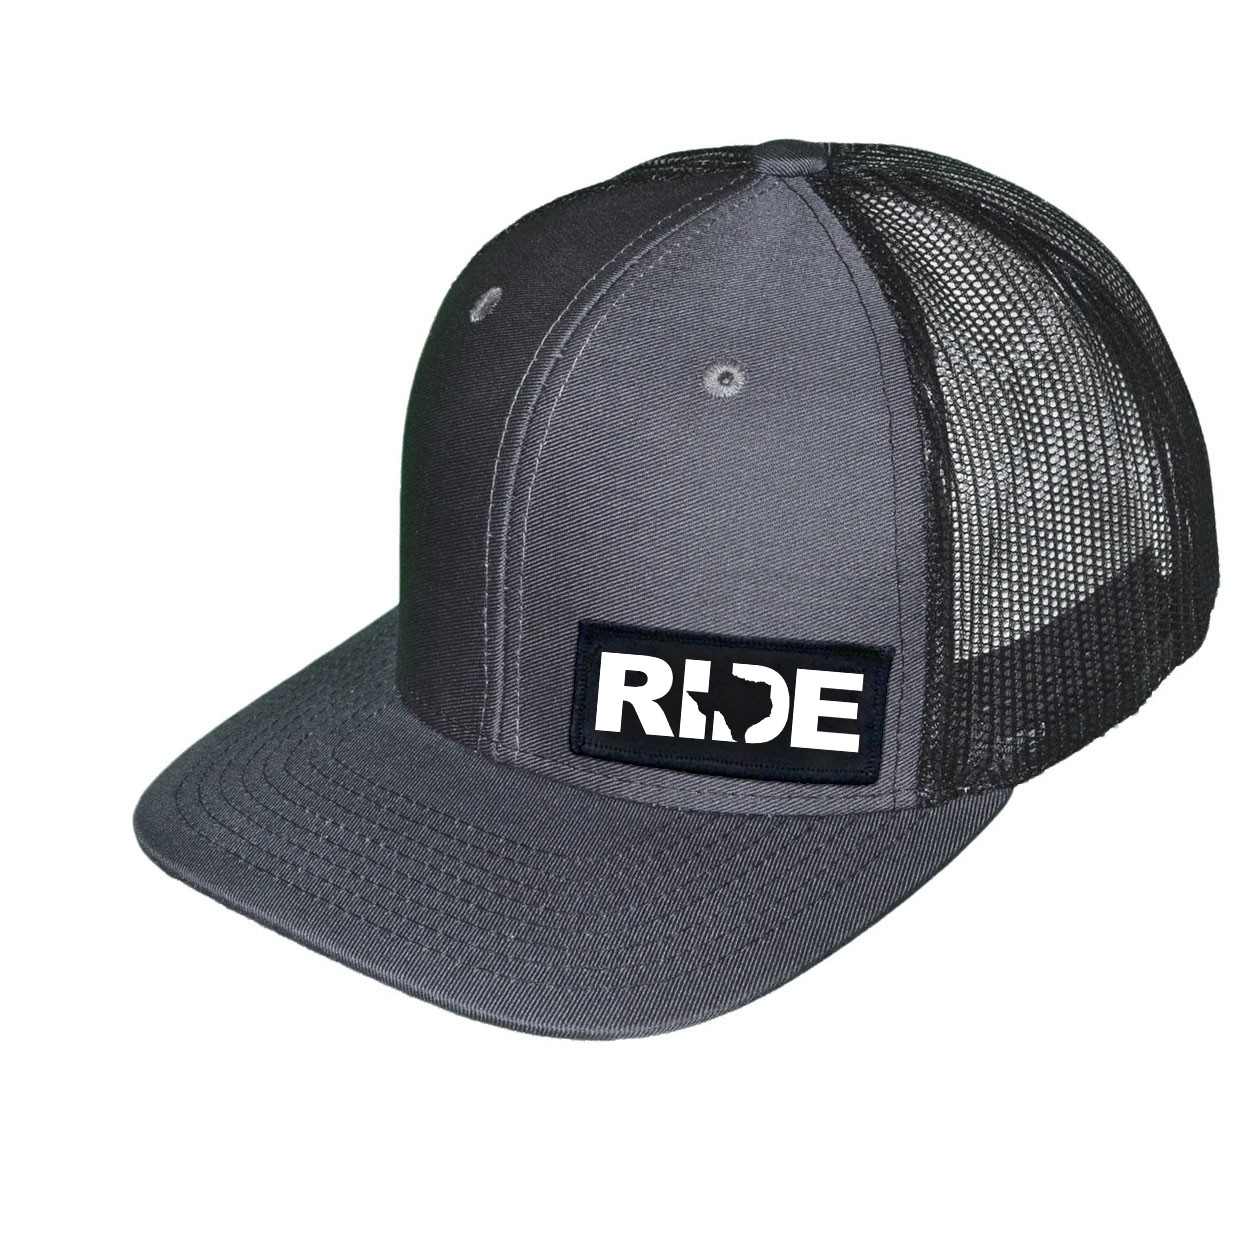 Ride Texas Night Out Woven Patch Snapback Trucker Hat Gray/Black (White Logo)